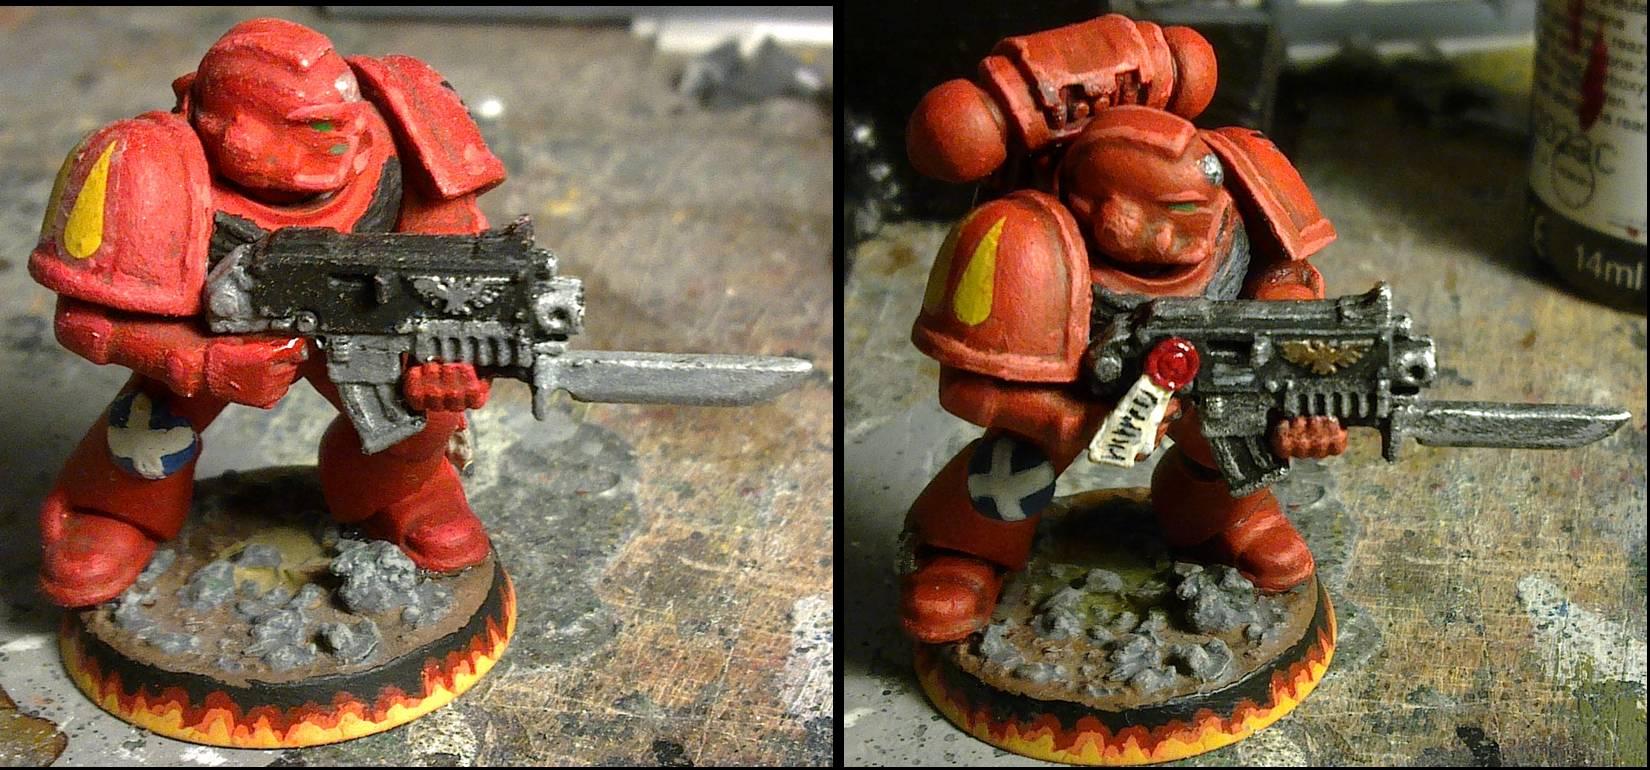 Tactical Marine Number 2 before and after